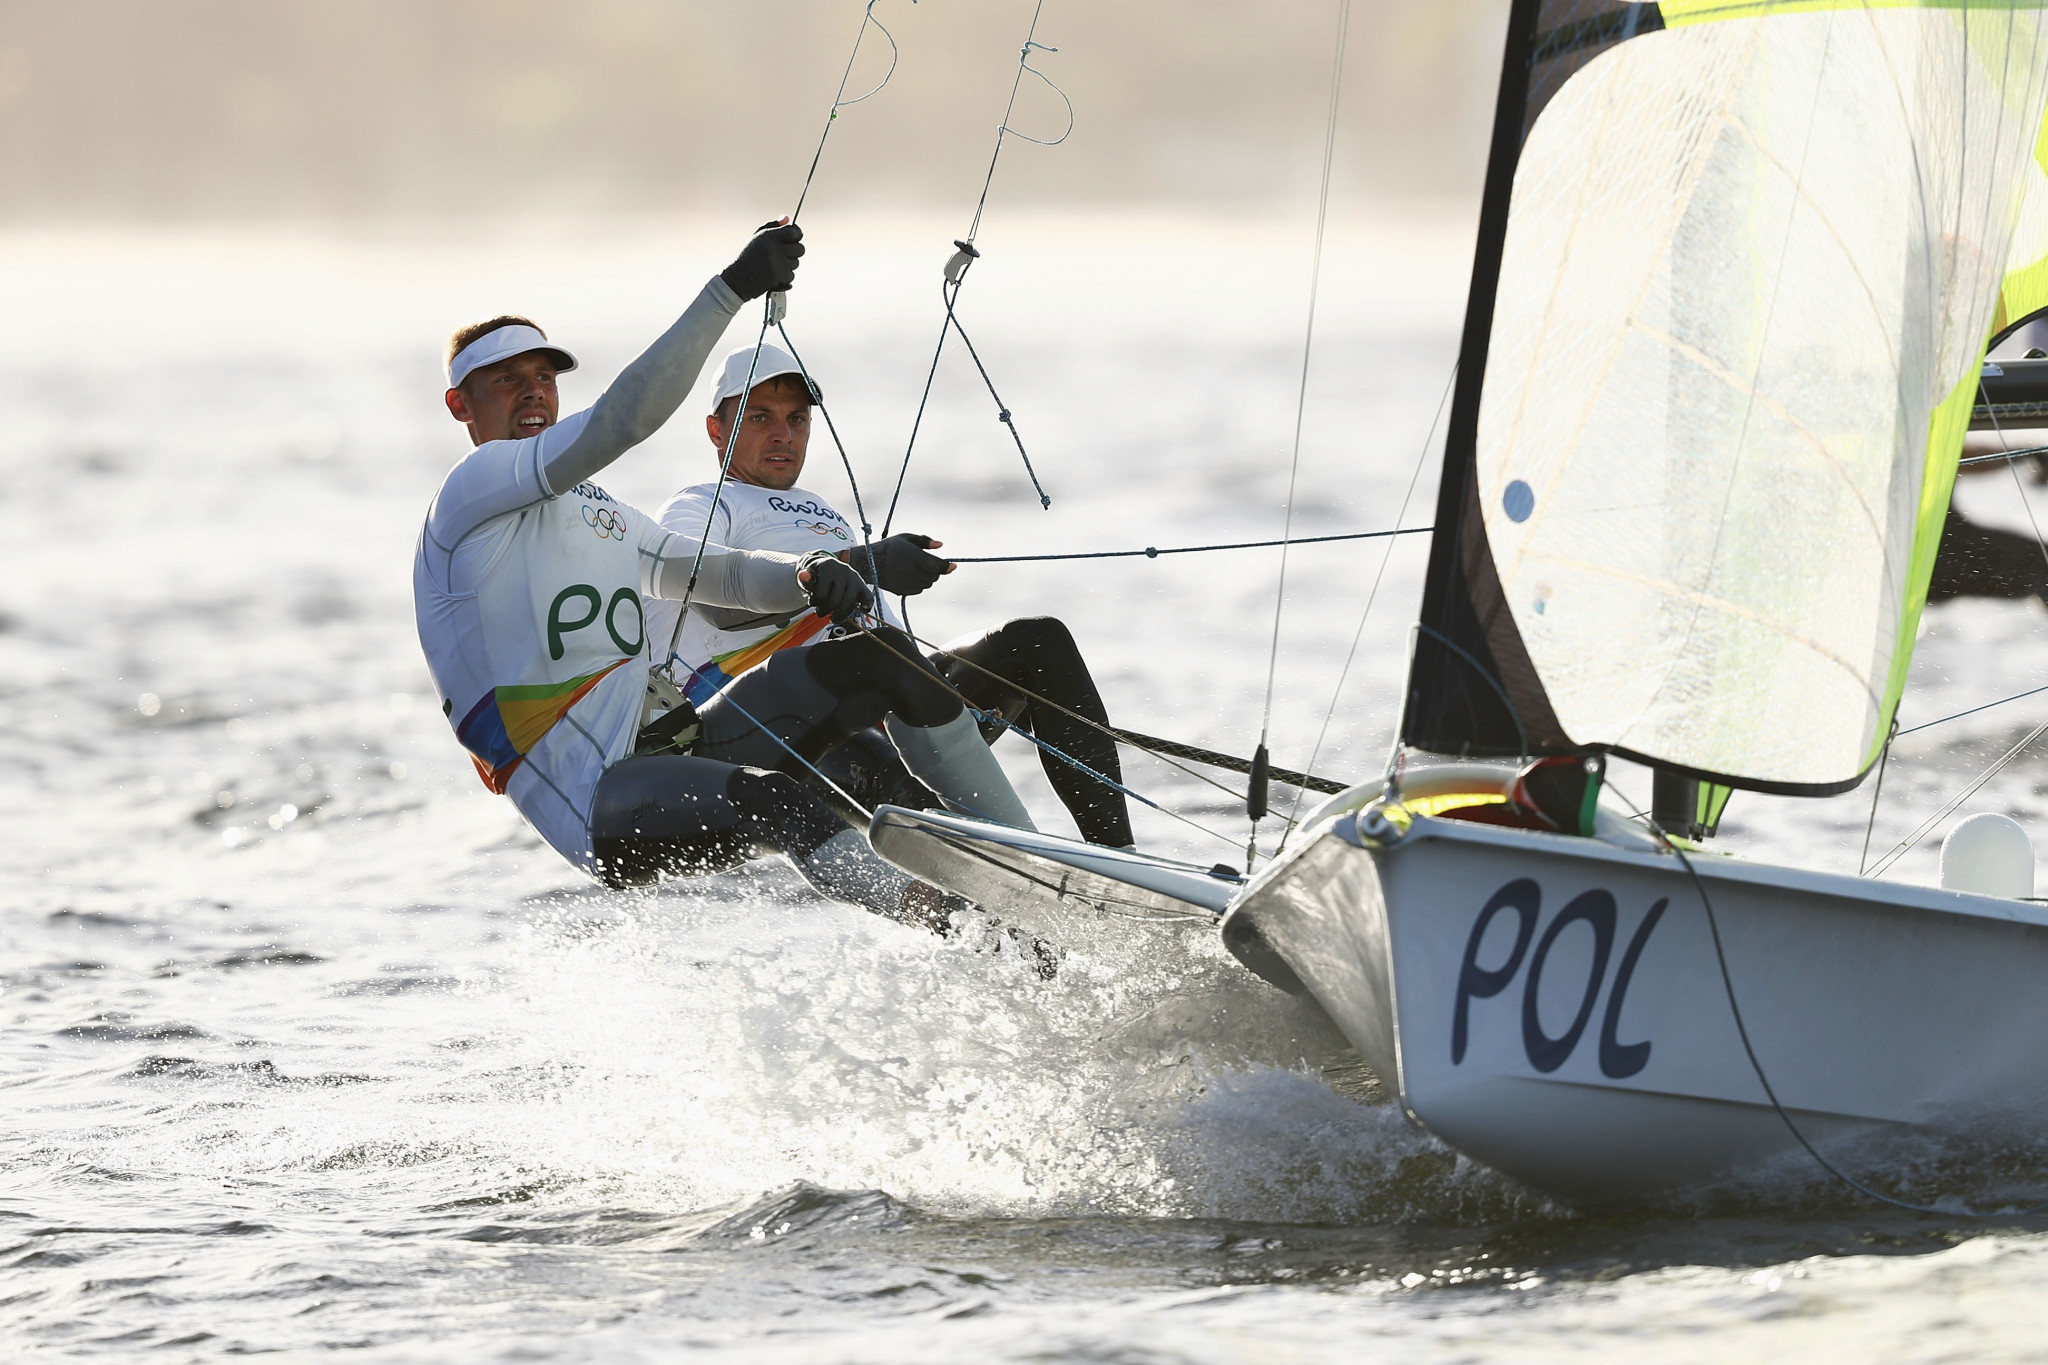 Poland's Lukasz Przybytek and Pawel Kolodzinski now hold the lead in the 49er class at the European Championships in Gdynia ©Getty Images